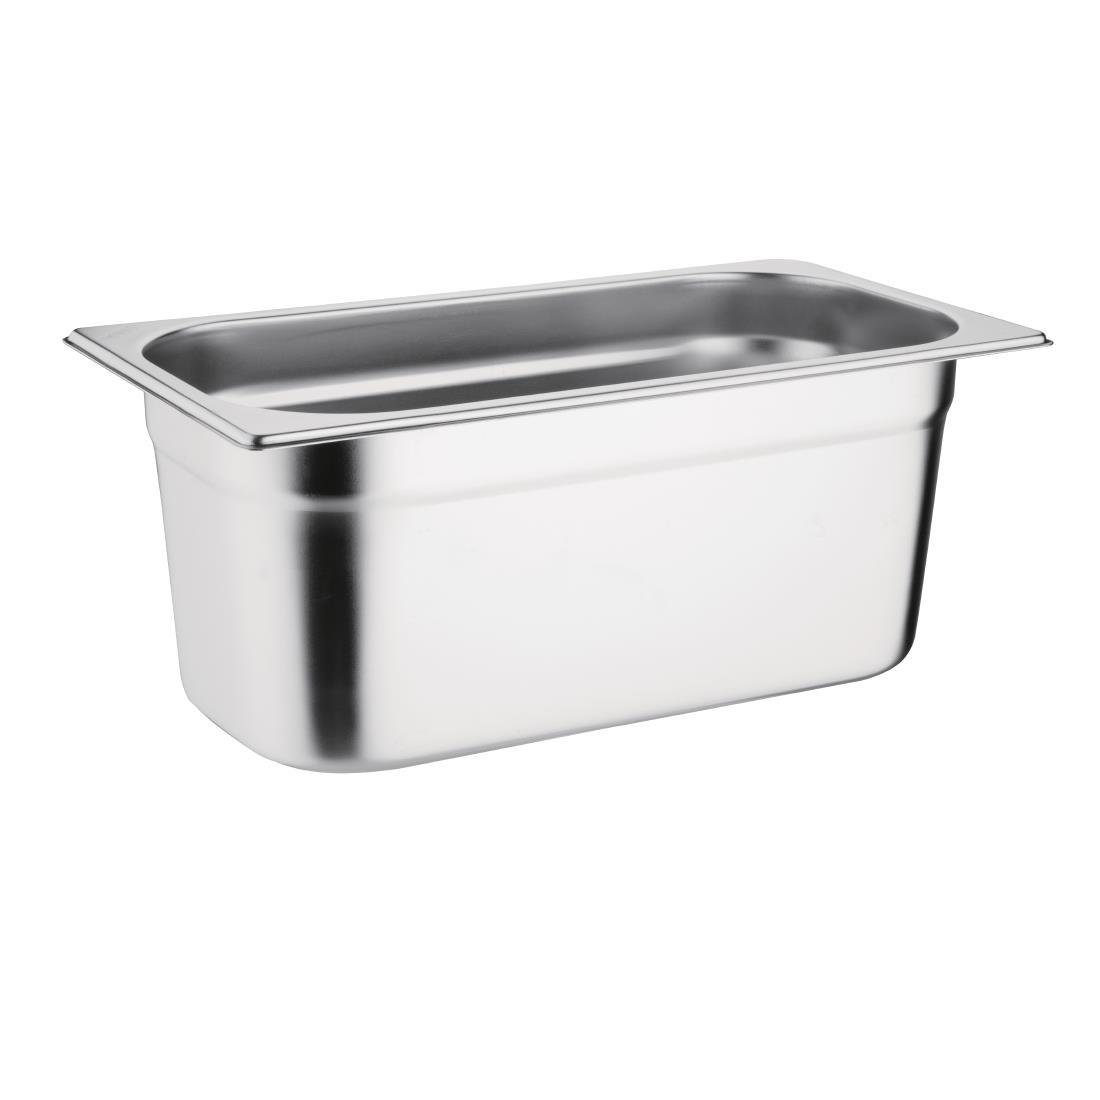 Vogue Stainless Steel 1/3 Gastronorm Pan 100mm - K933  - 1